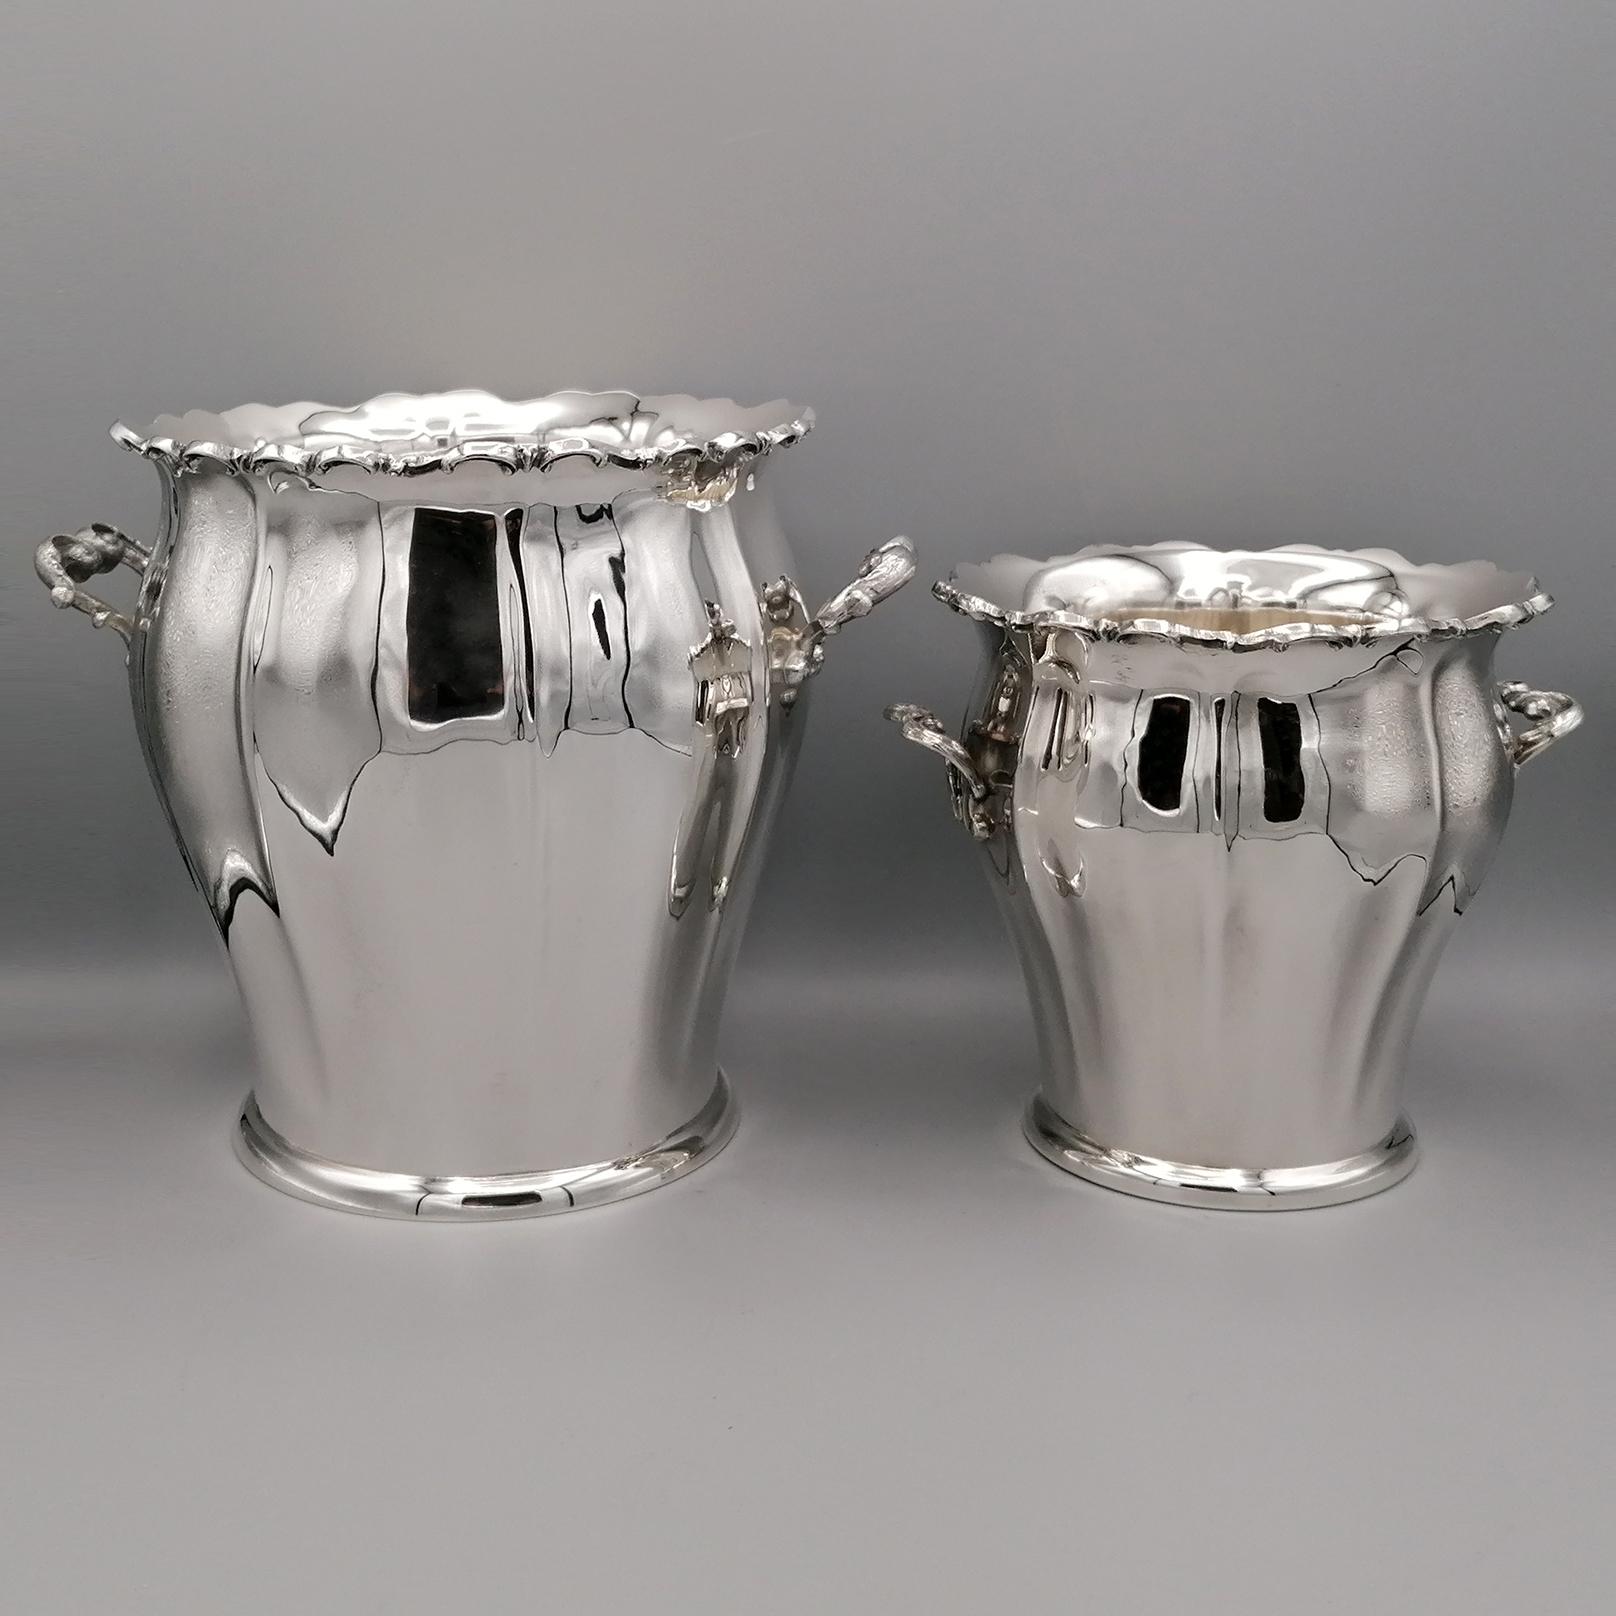 800 solid silver champagne bucket and ice bucket in baroque style.
The body of the buckets was shaped and embossed with ribs typical of the Baroque style.
The handles of the buckets were made with the casting technique and then knurled to make the